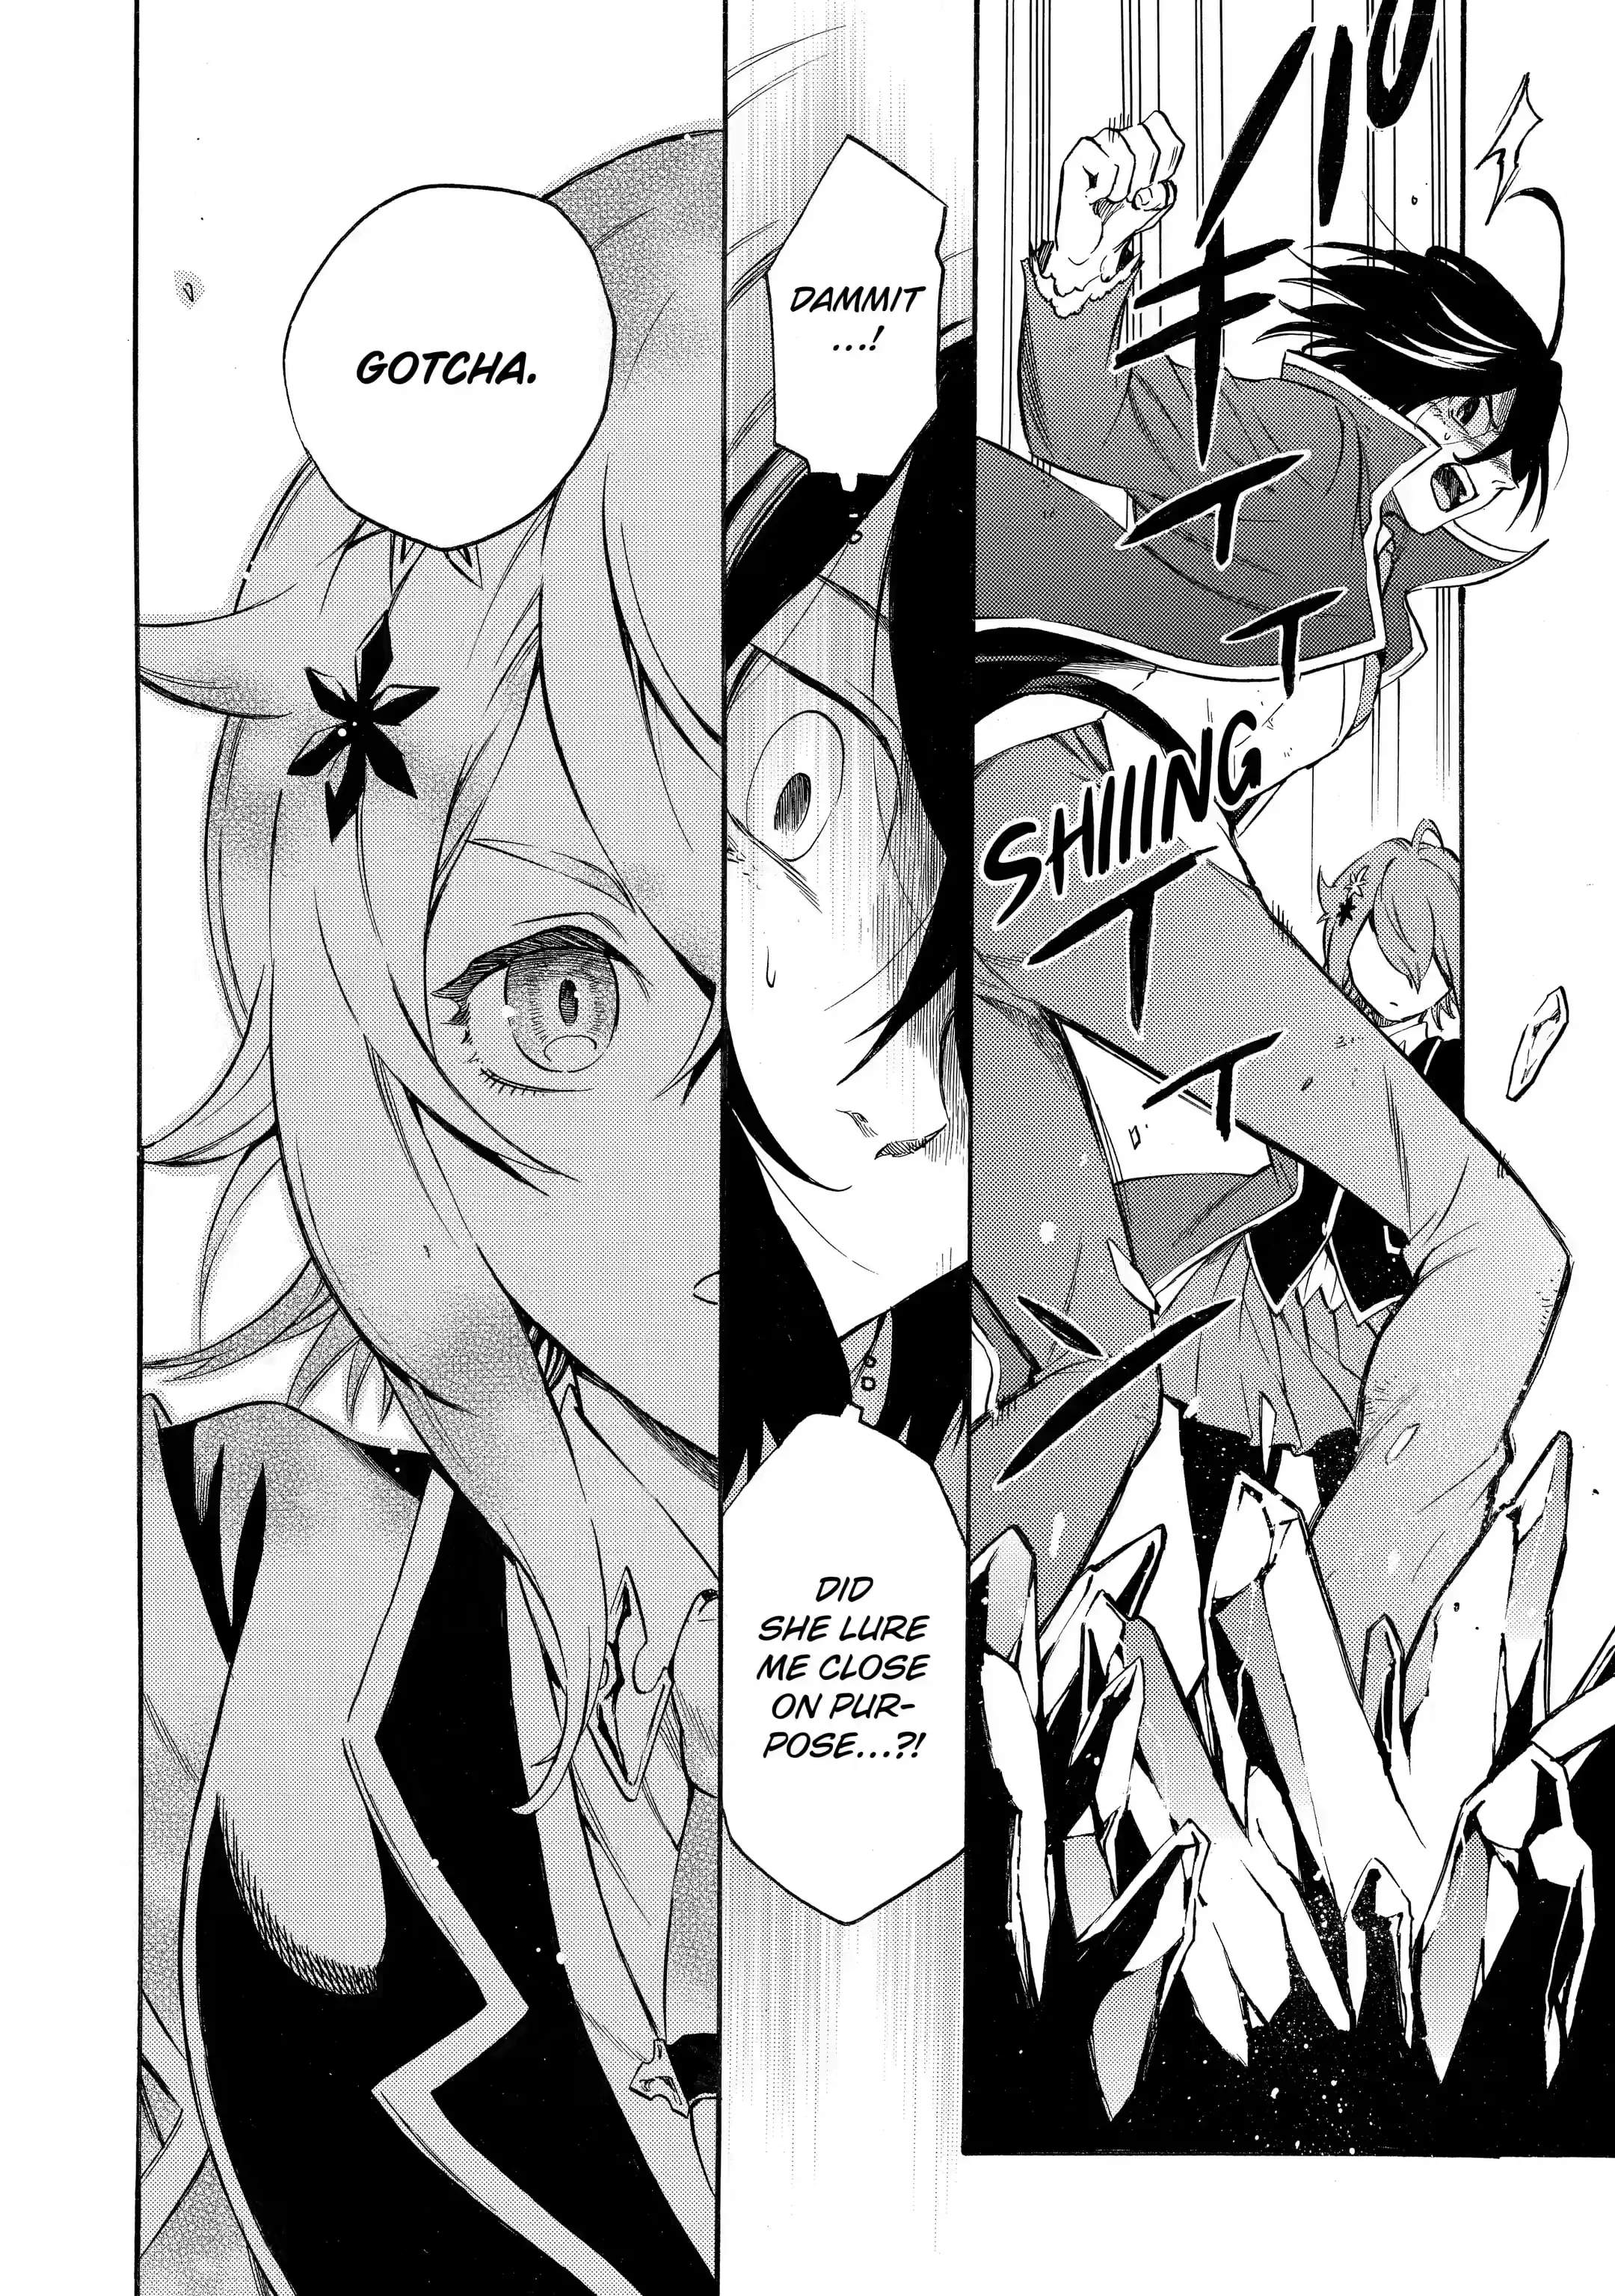 Reincarnation of the Unrivalled Time Mage: The Underachiever at the Magic Academy Turns Out to Be the Strongest Mage Who Controls Time! Chapter 8.1-eng-li - Page 7